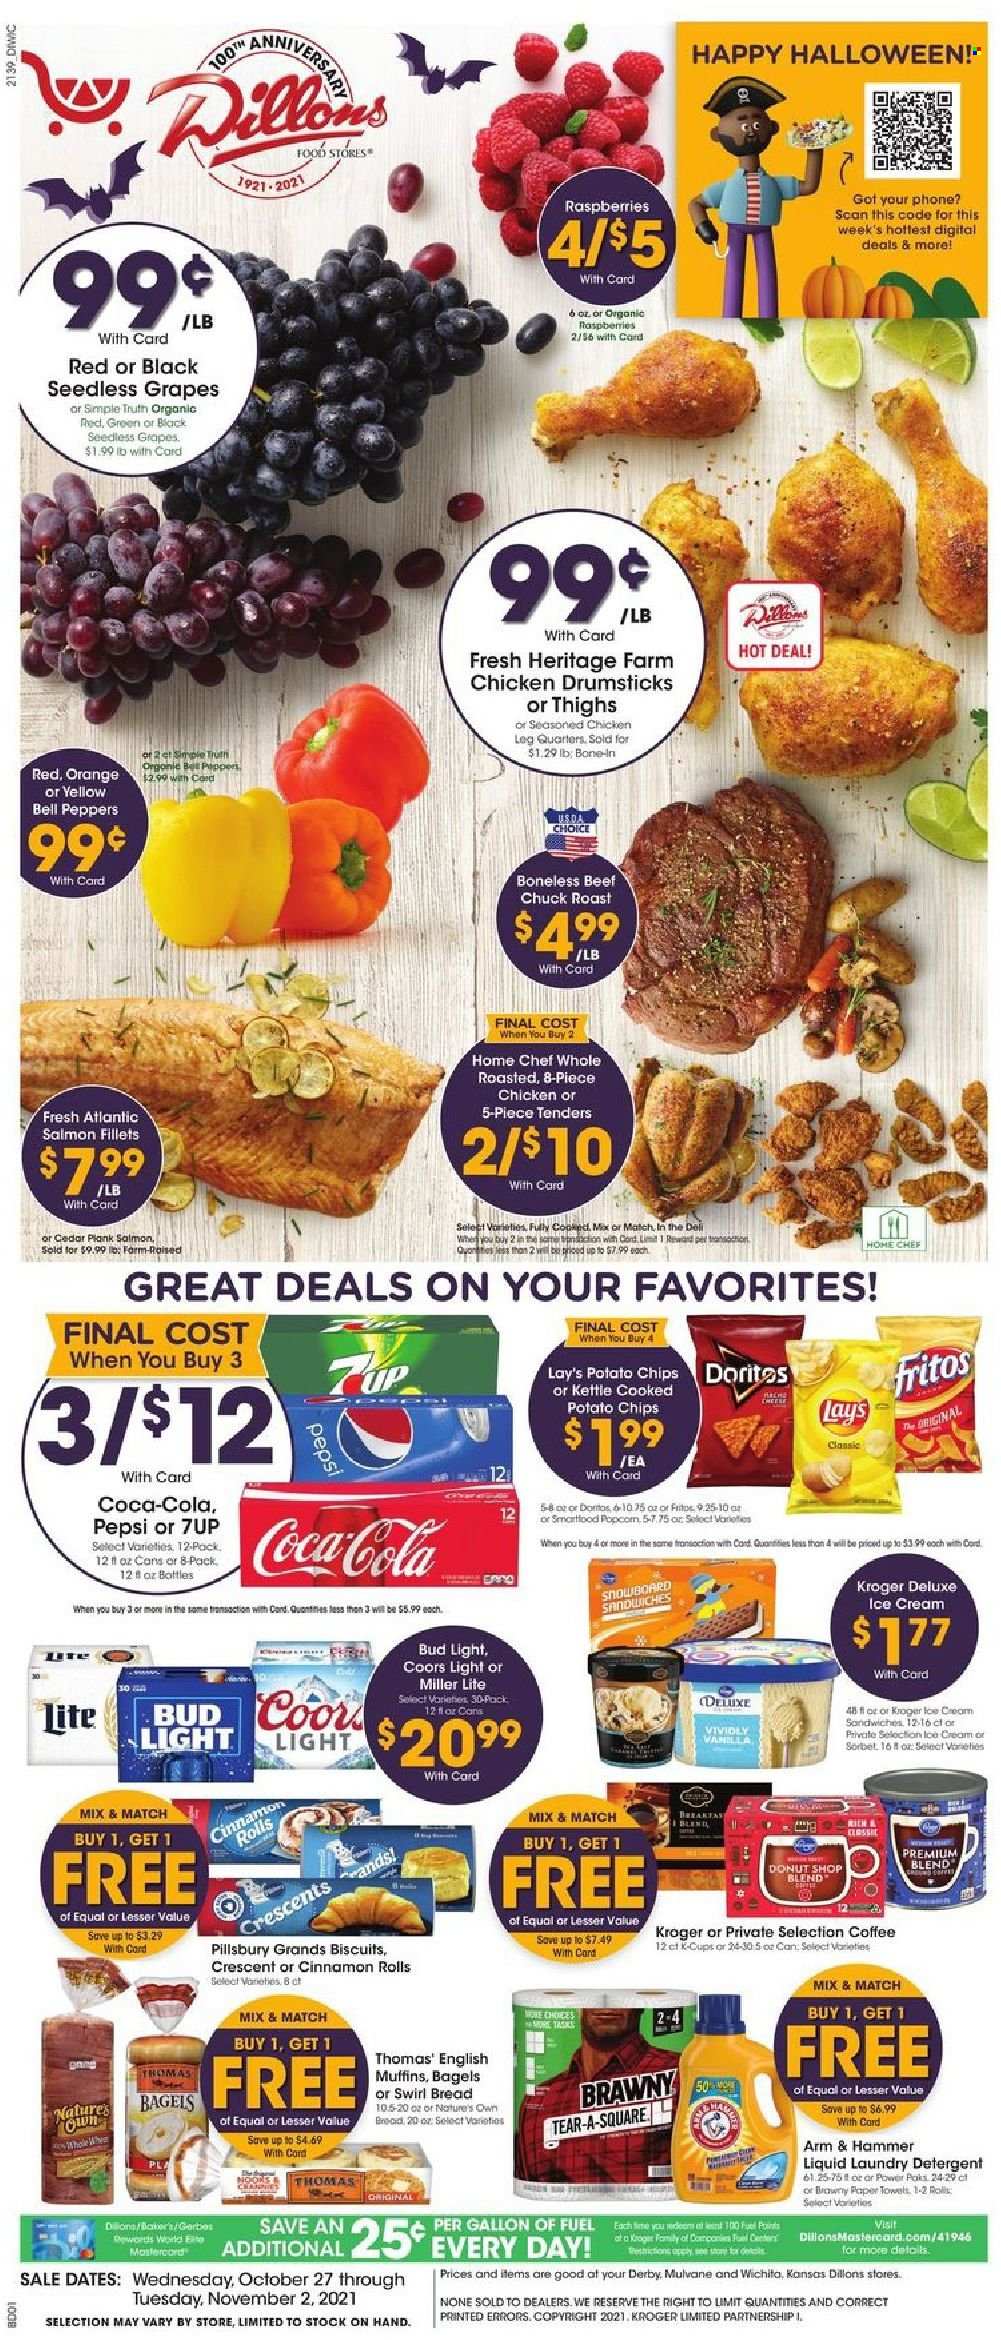 thumbnail - Dillons Flyer - 10/27/2021 - 11/02/2021 - Sales products - seedless grapes, bagels, bread, english muffins, cinnamon roll, bell peppers, peppers, grapes, oranges, salmon, salmon fillet, sandwich, Pillsbury, ice cream, biscuit, Fritos, potato chips, chips, Lay’s, ARM & HAMMER, Coca-Cola, Pepsi, 7UP, coffee, L'Or, beer, Bud Light, chicken legs, chicken drumsticks, beef meat, chuck roast, kitchen towels, paper towels, detergent, laundry detergent, Dior, Halloween, Nature's Own, Miller Lite, Coors. Page 1.